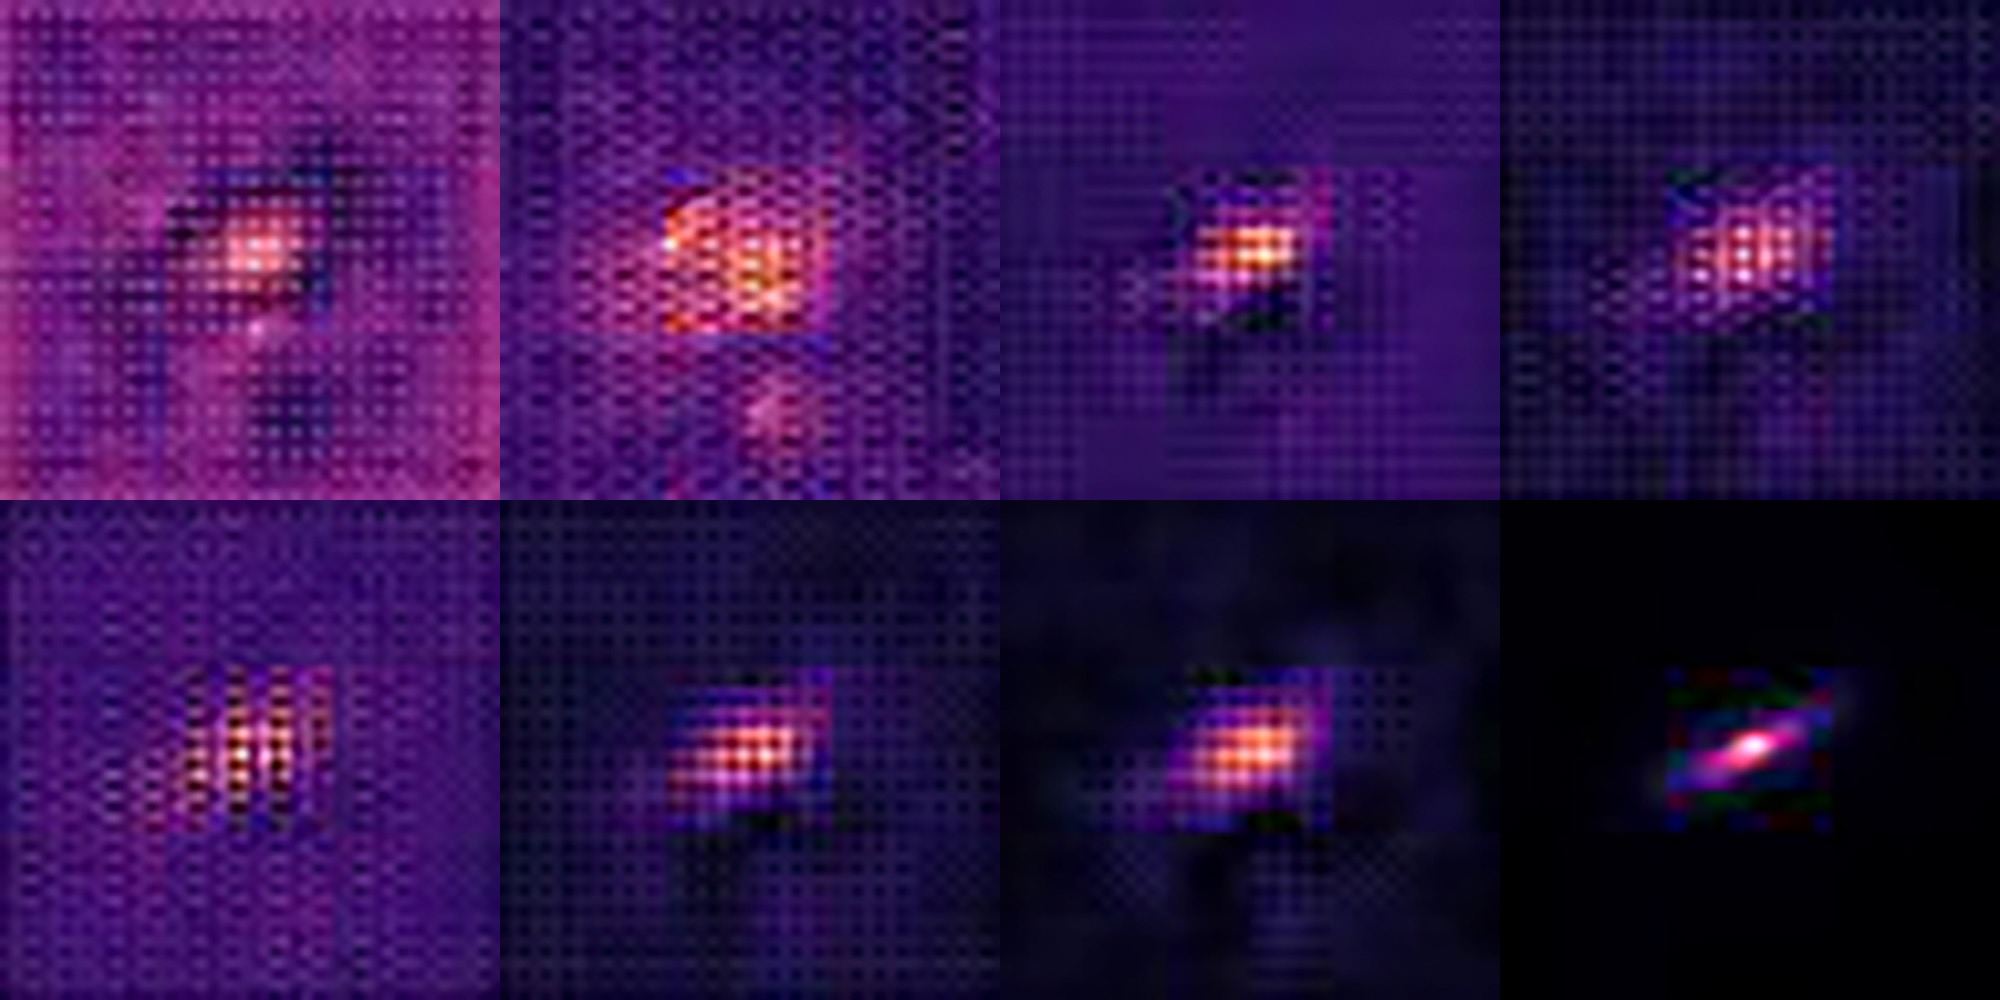 eight panels showing an increasingly clear purple and orange streak of light